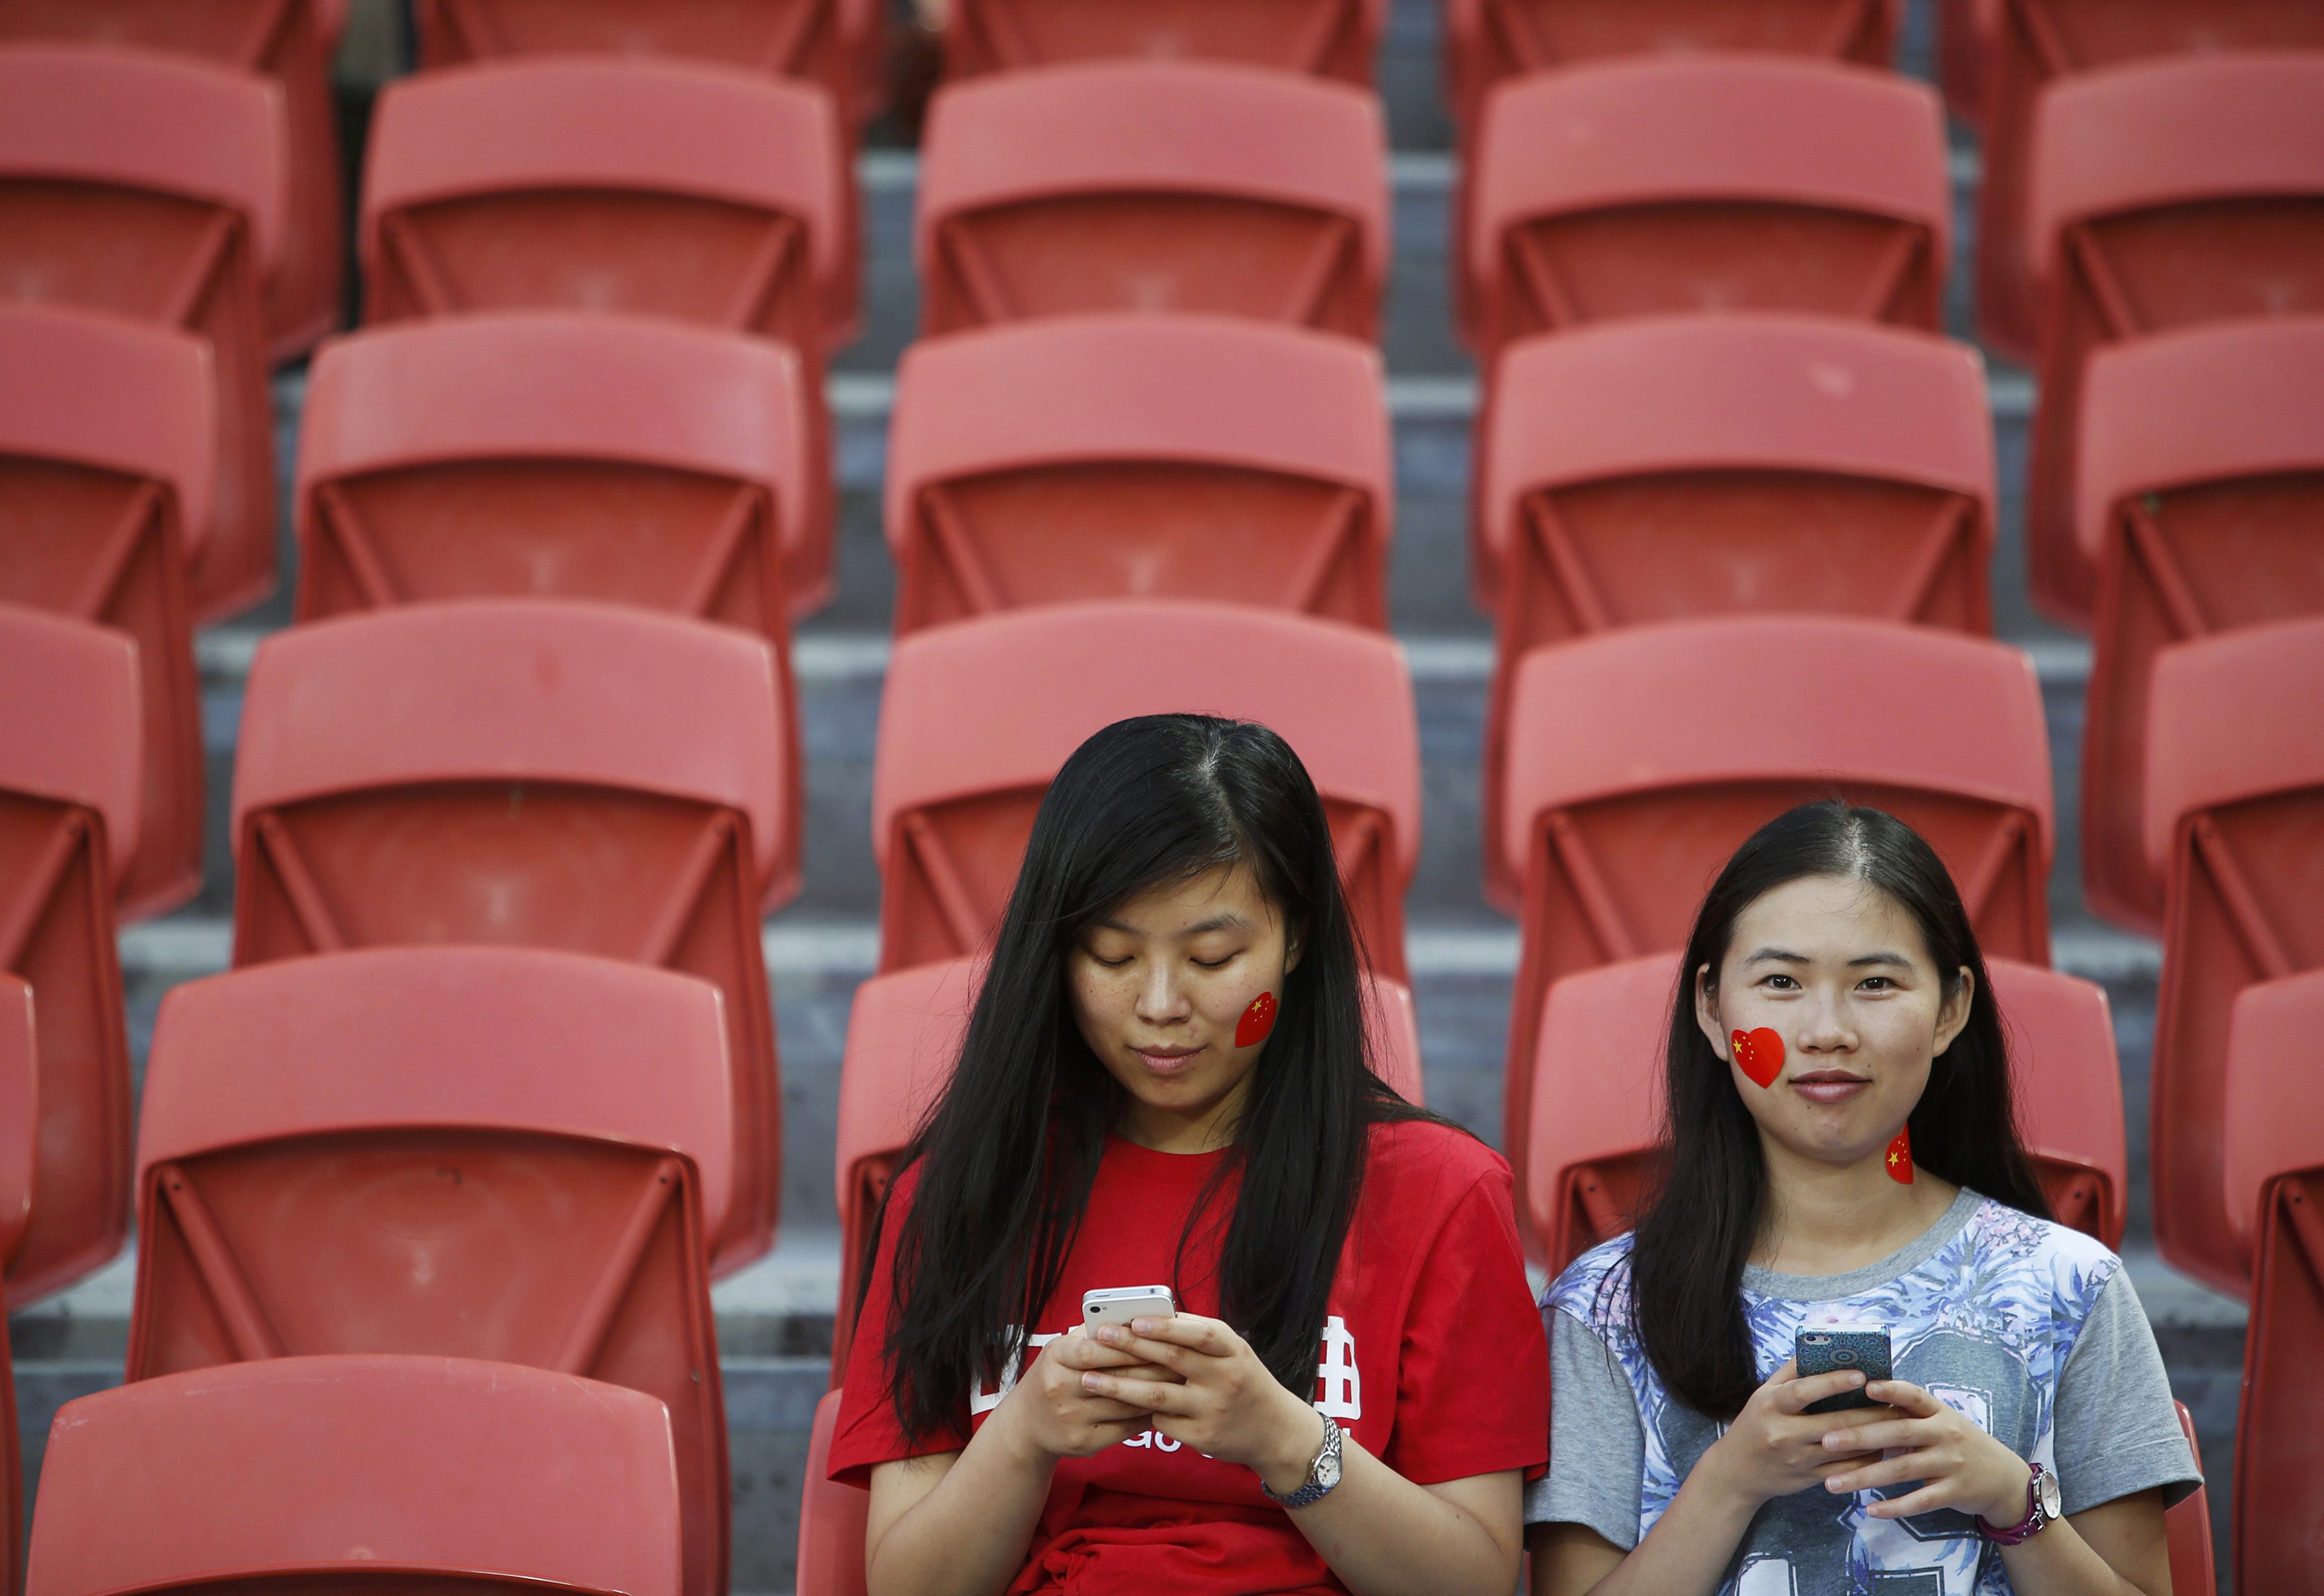 Smartphones are increasingly used for shopping as well as messaging and browsing the internet. Photo: Reuters